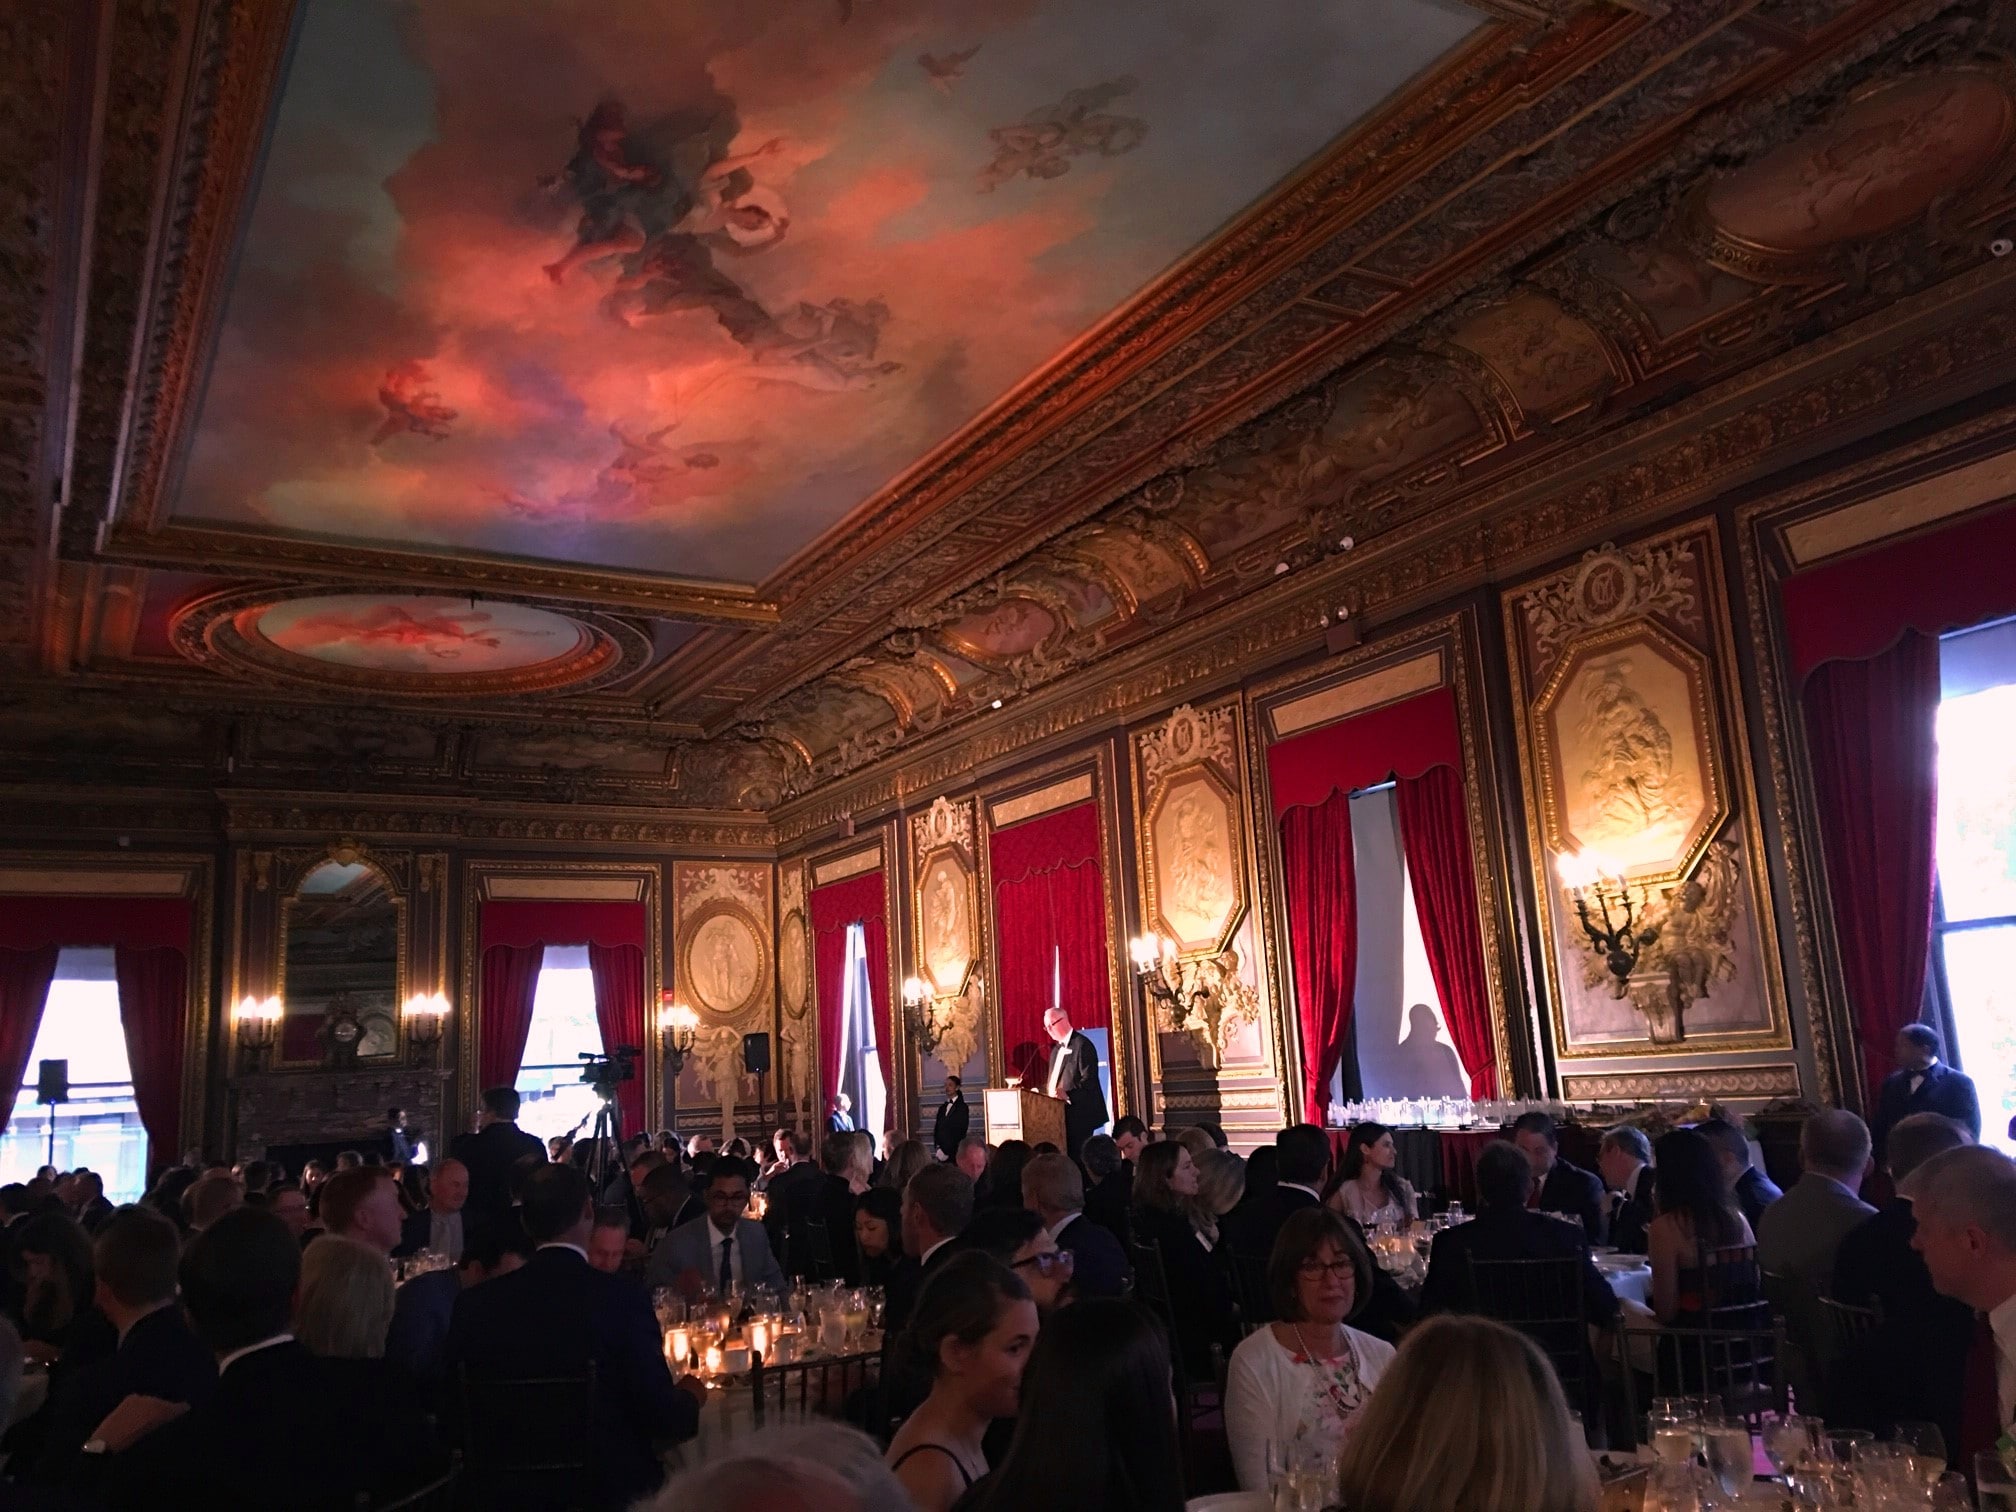 New York City Ballroom with painted ceiling and artwork on walls. People dining at tables.